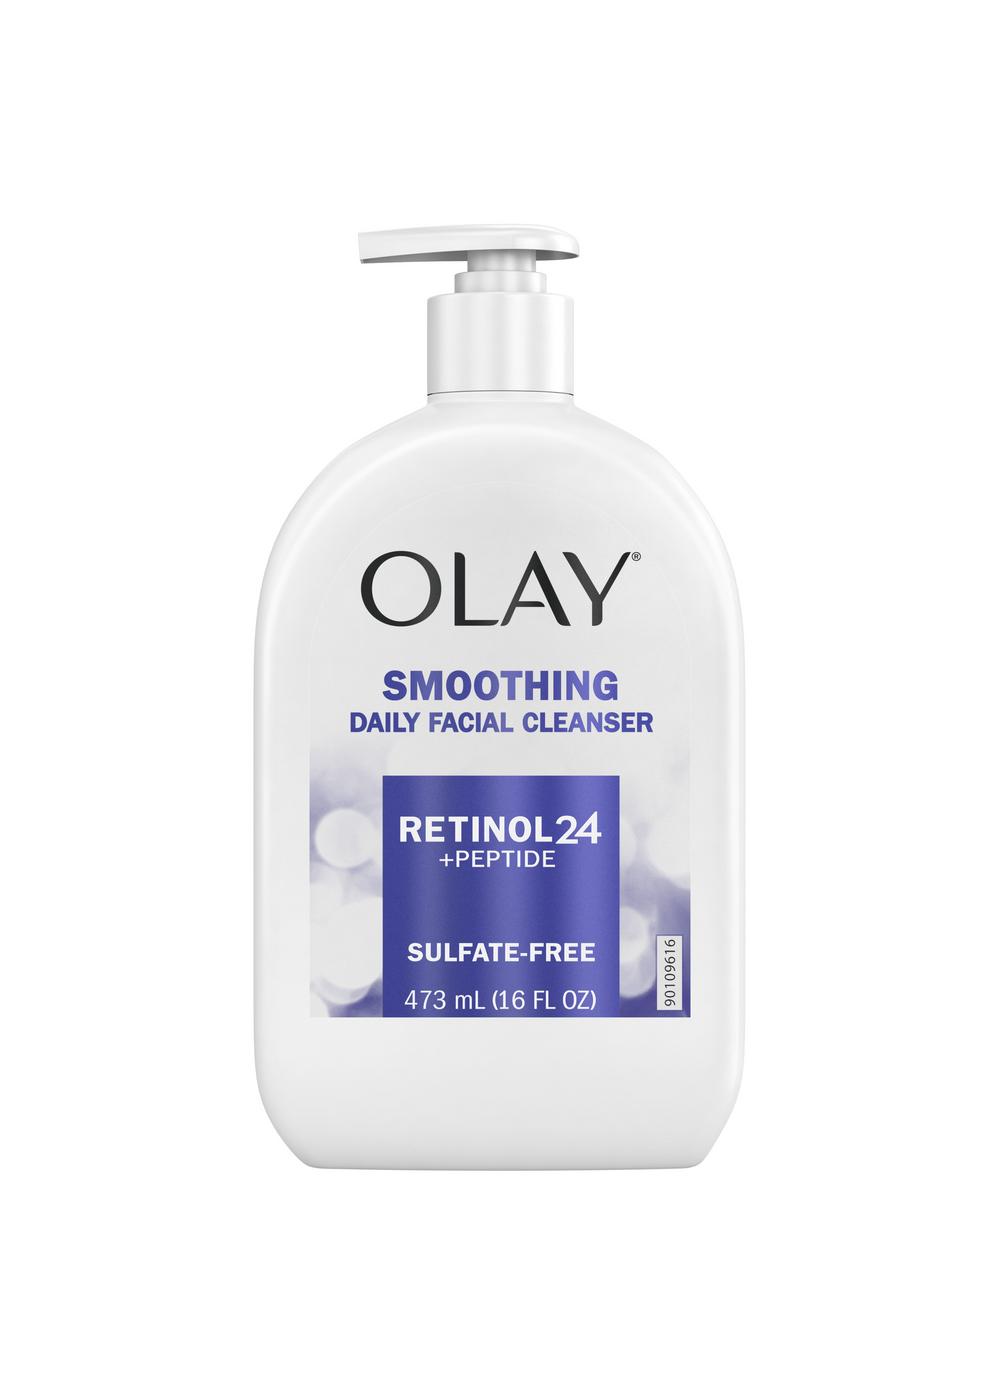 Olay Smoothing Daily Facial Cleanser Retinol 24 + Peptide; image 1 of 2